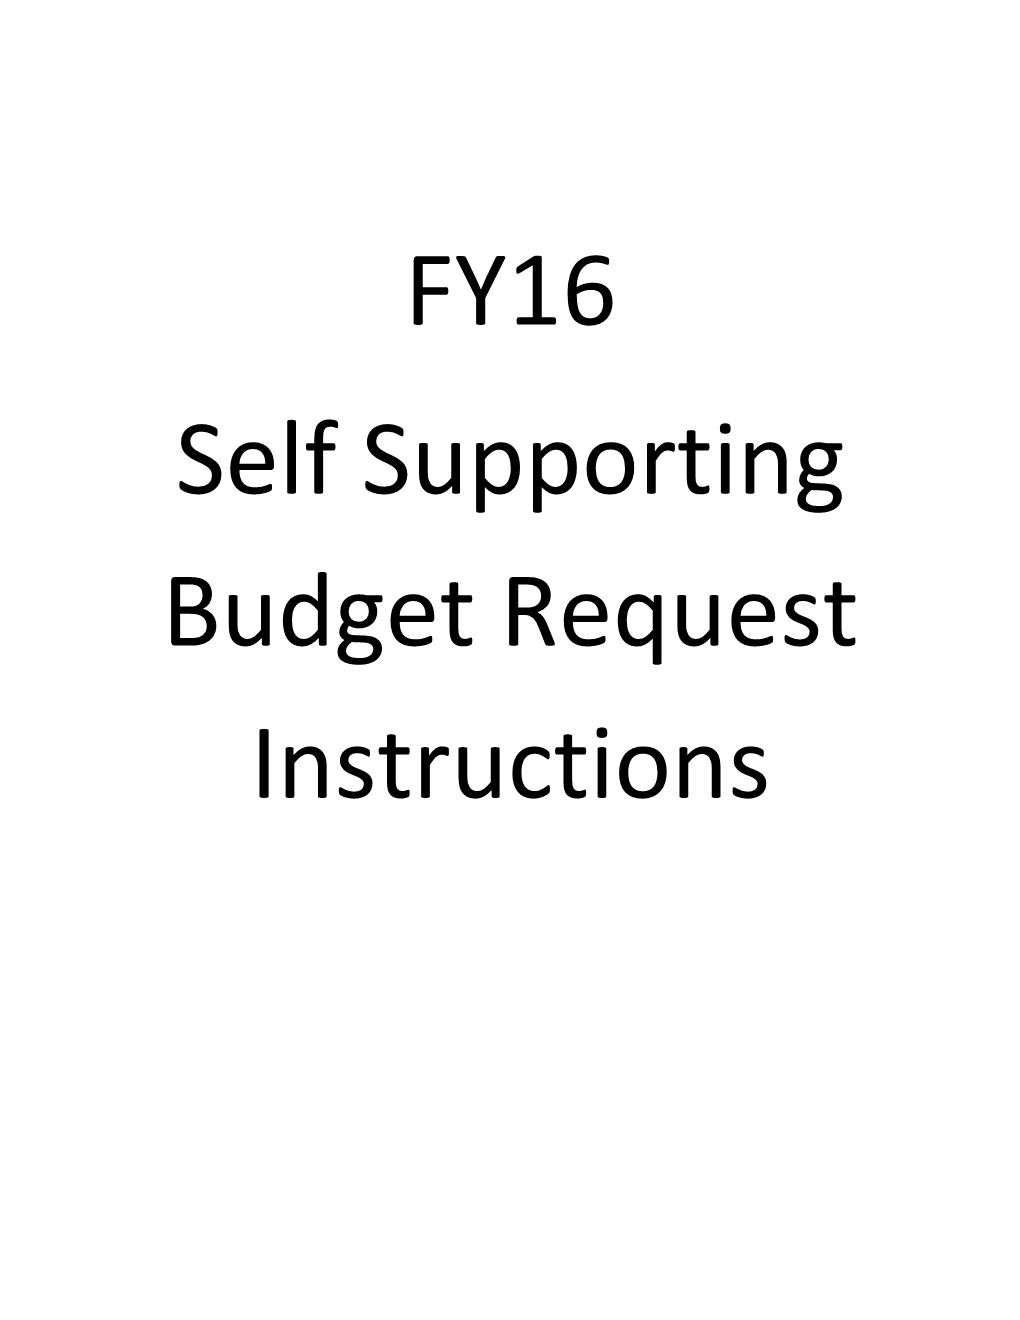 FY13 Self Supporting Budget Request Instructions